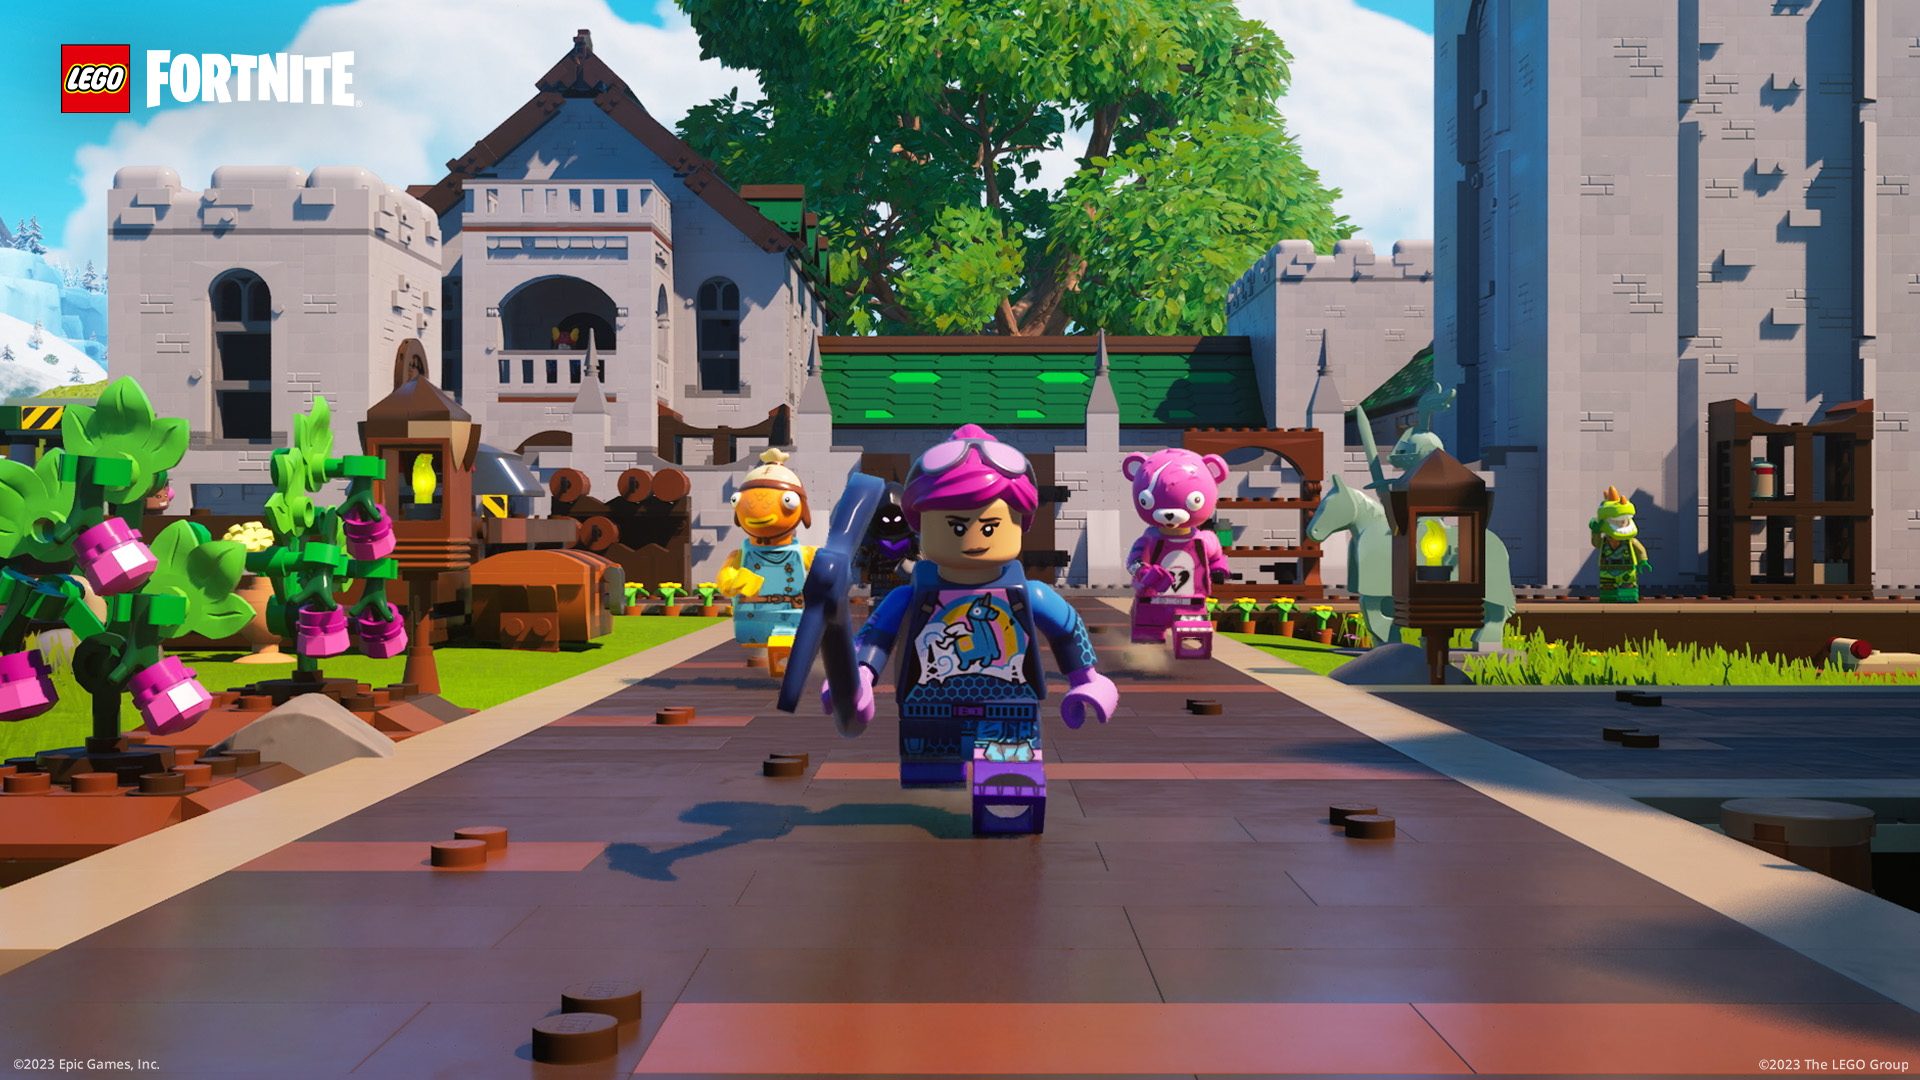 Connect Your Epic and LEGO Accounts, Get a Free Fortnite Outfit!